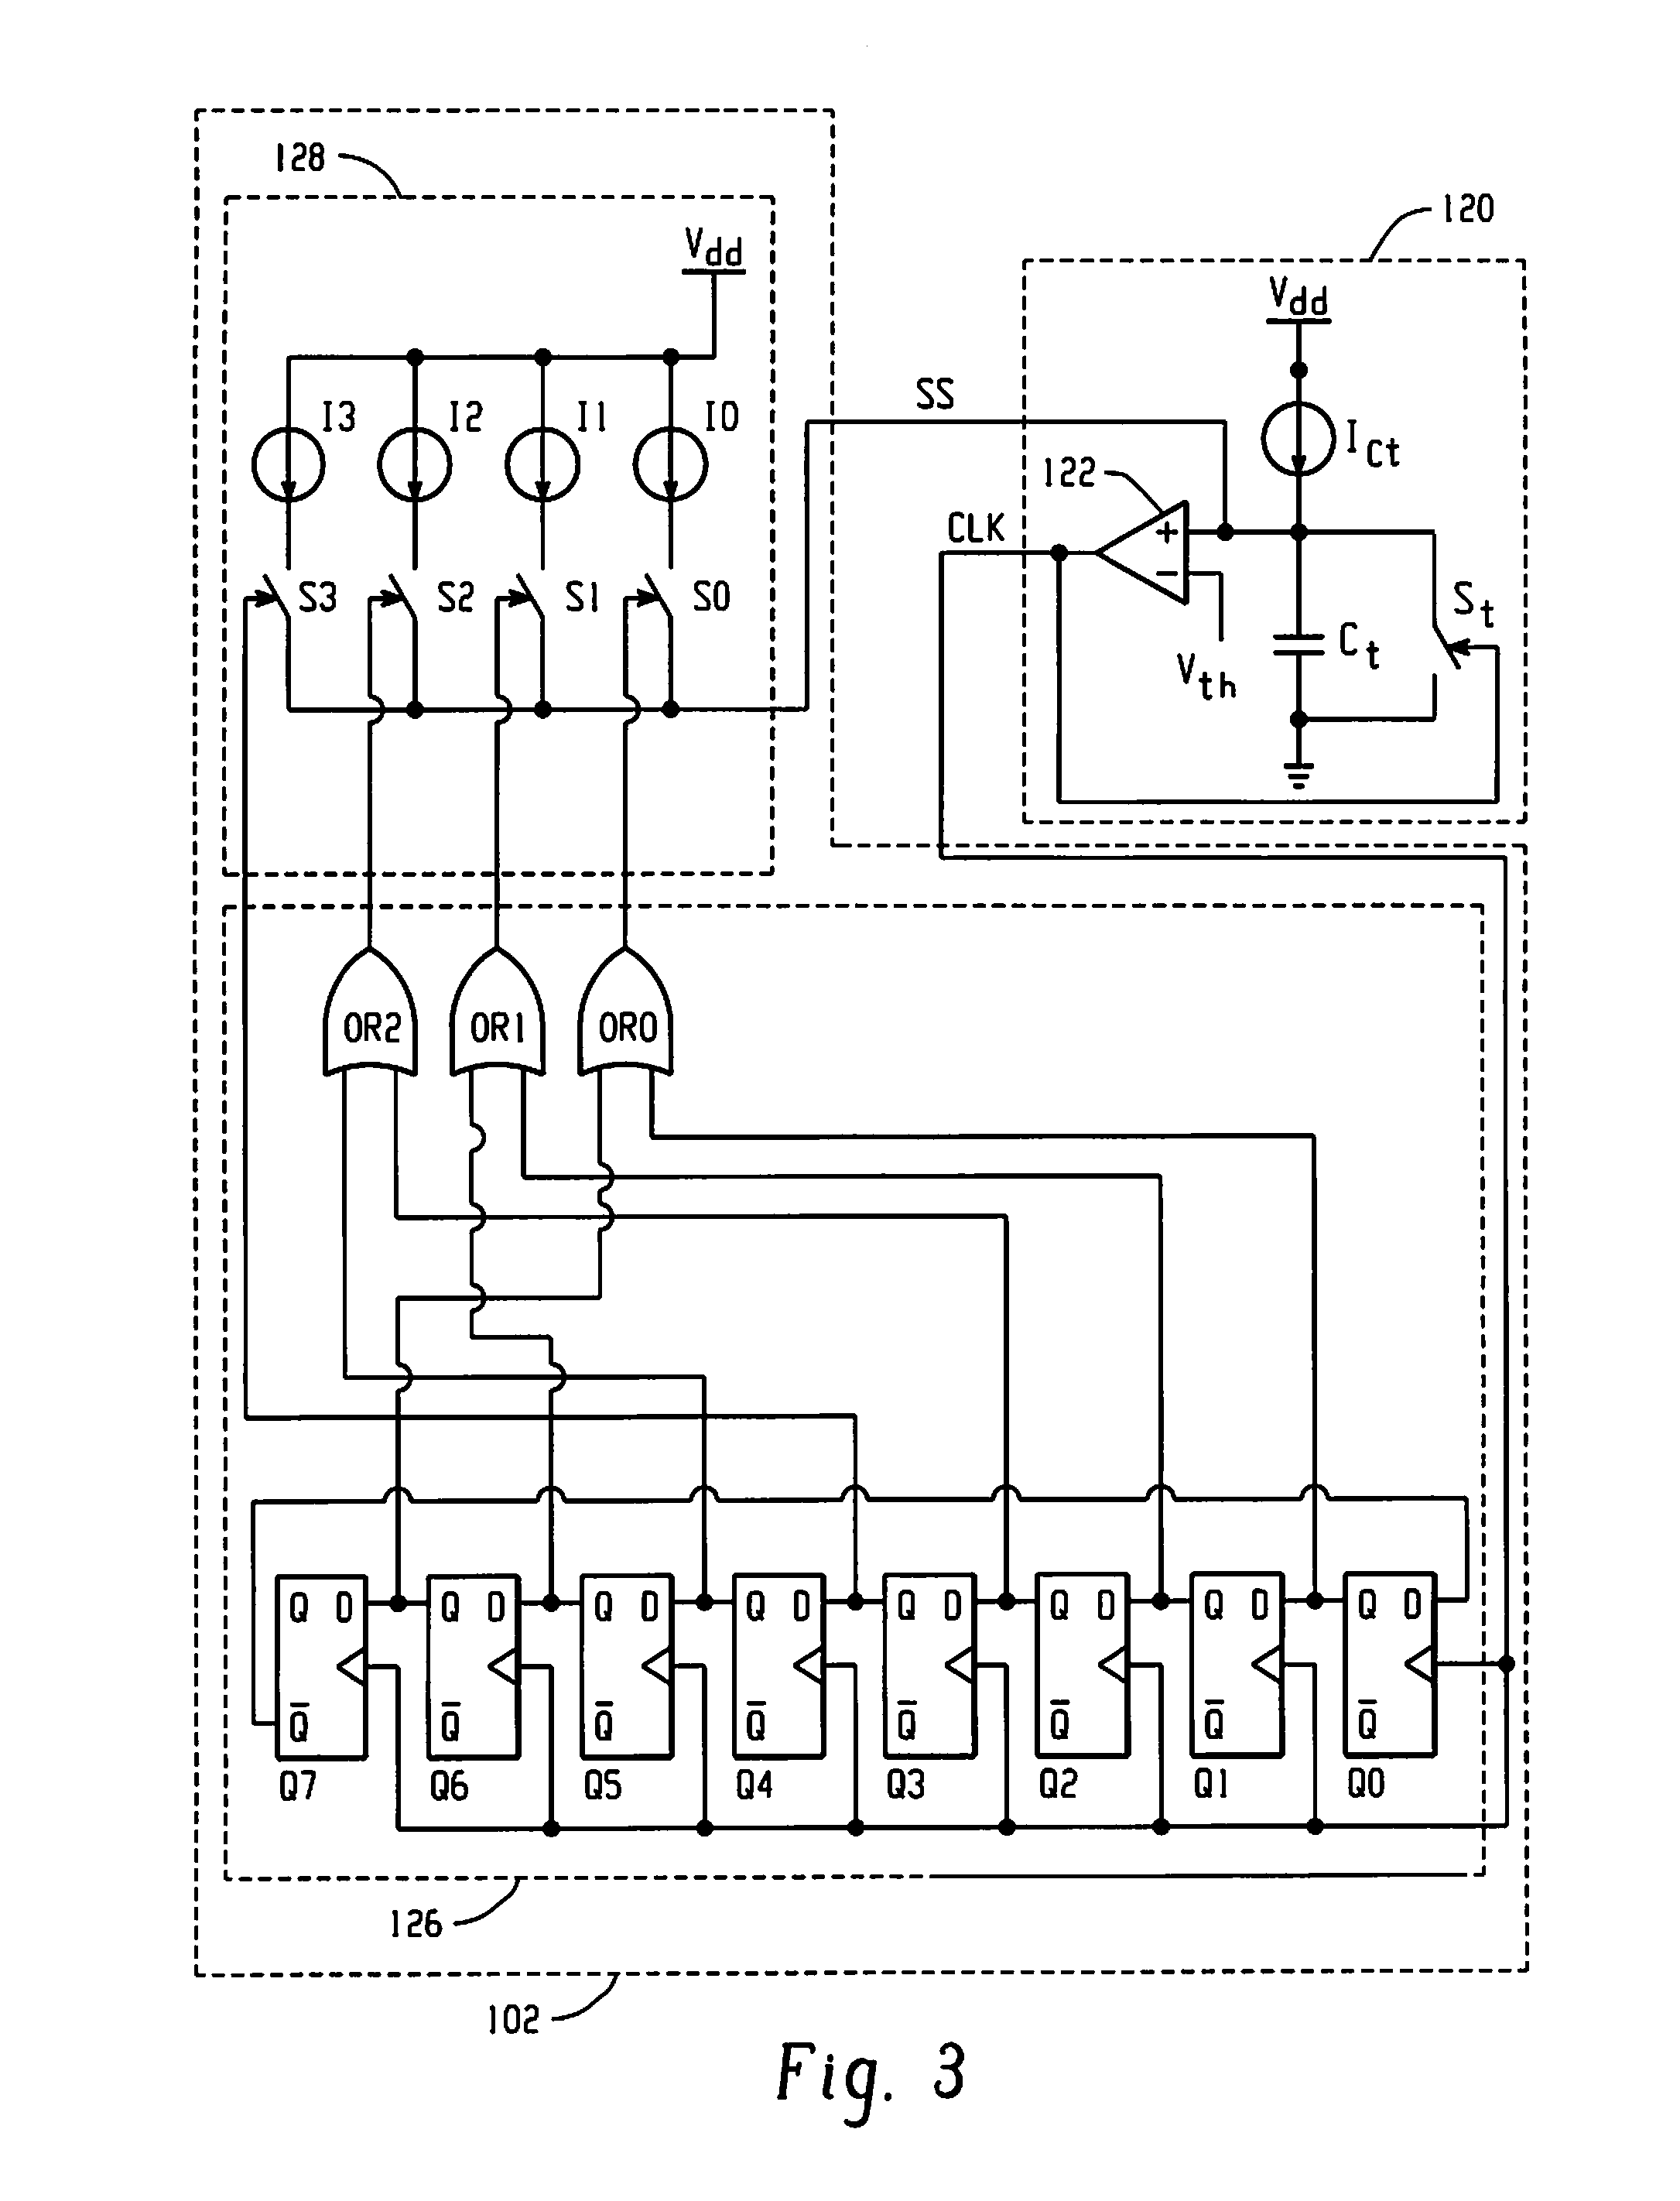 Switching mode power supply with a spectrum shaping circuit